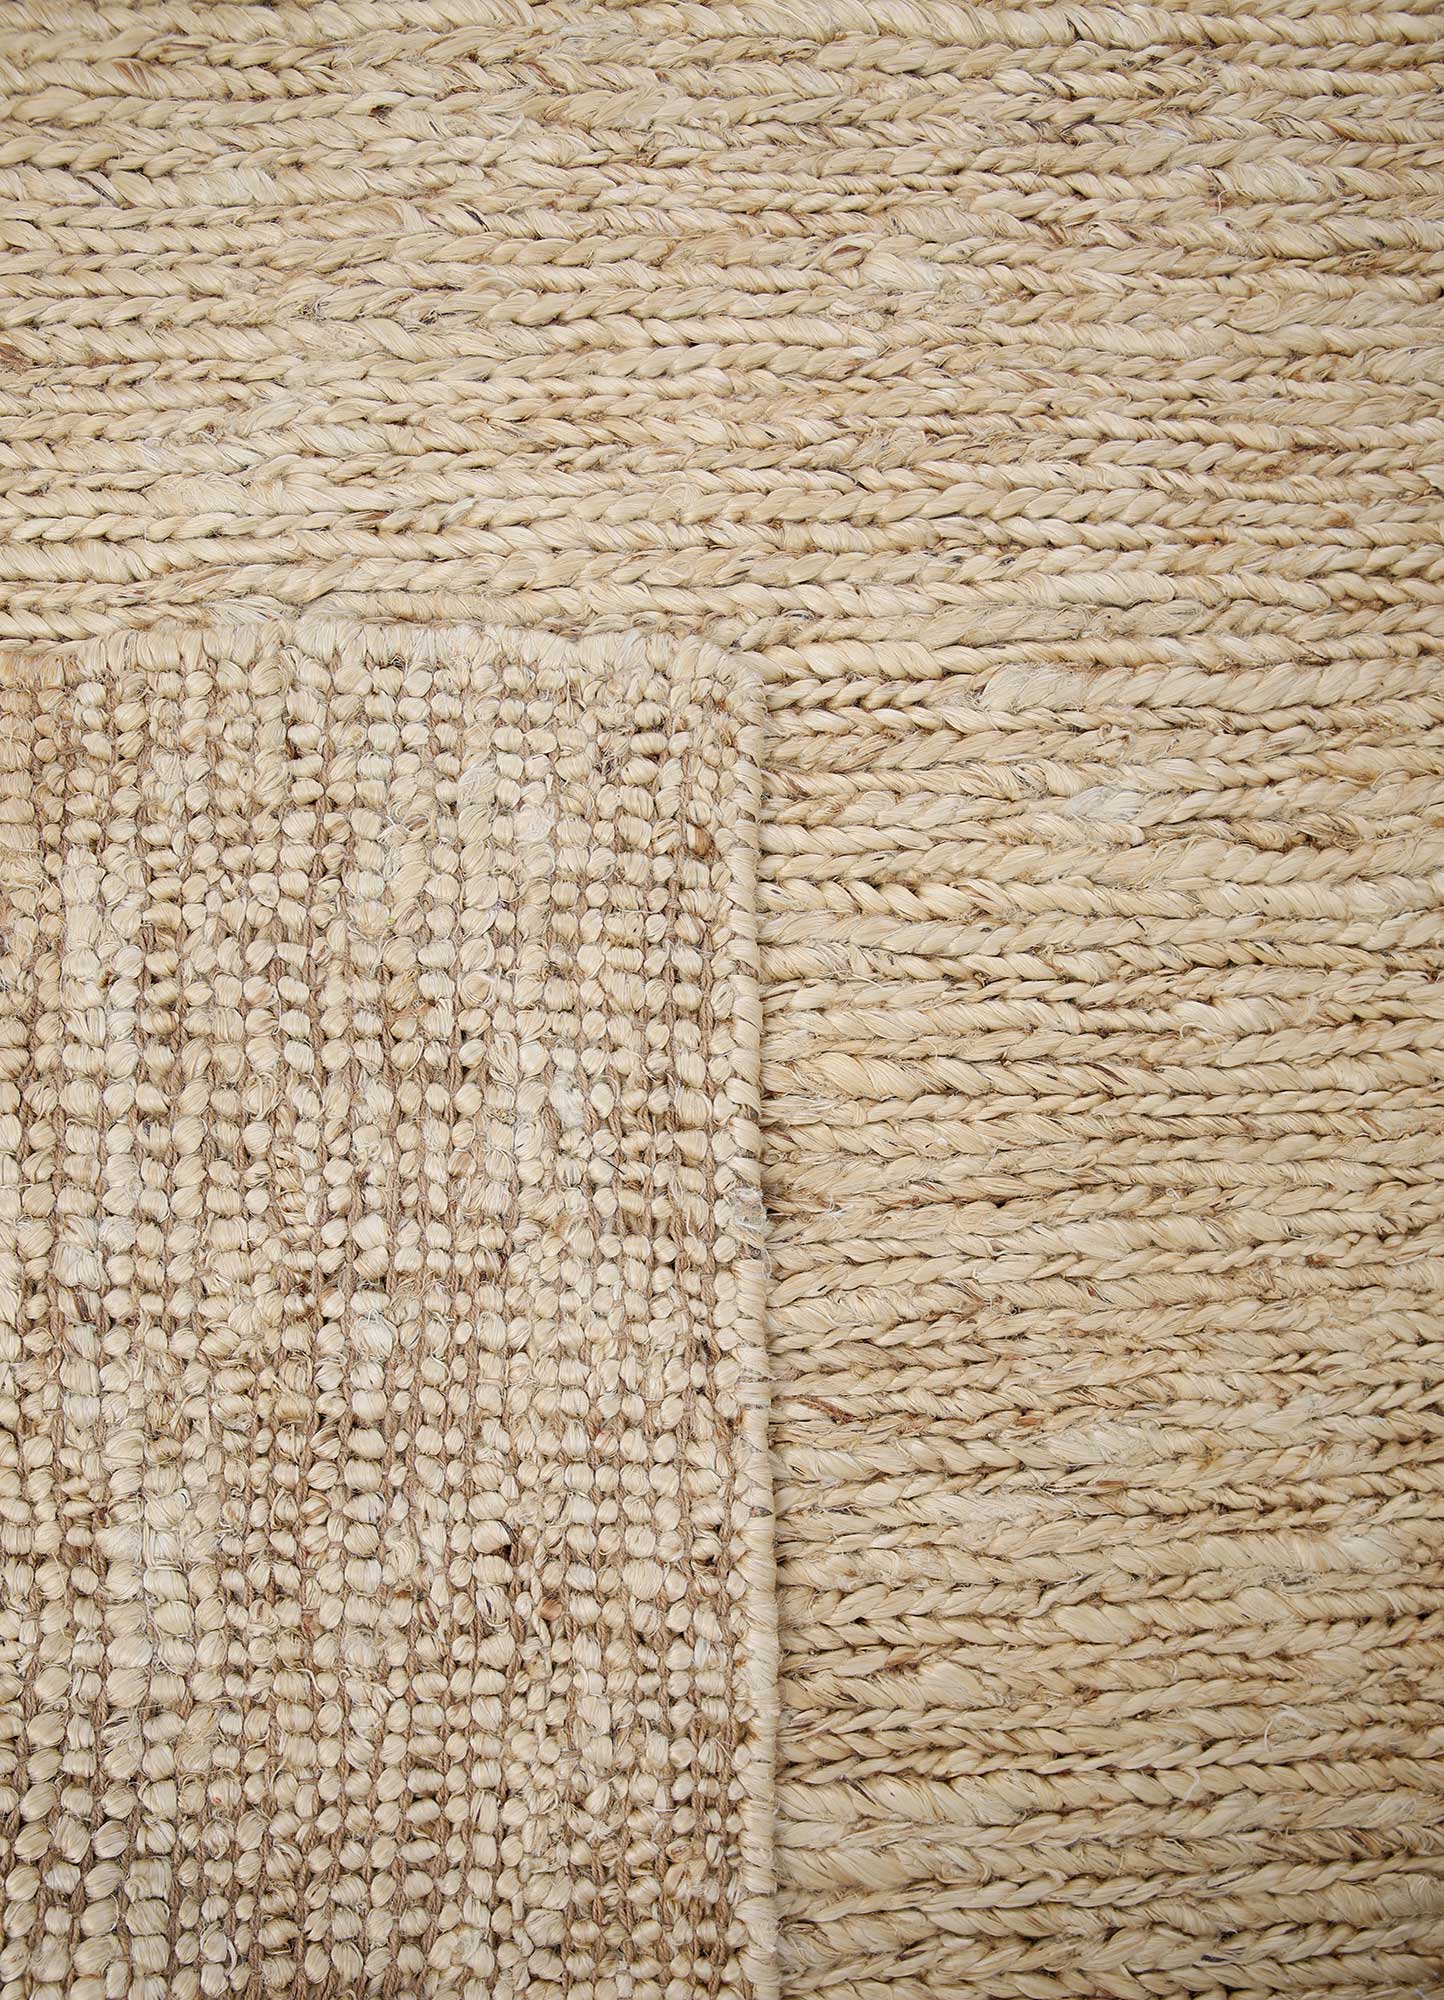 abrash beige and brown jute and hemp hand knotted Rug - Perspective